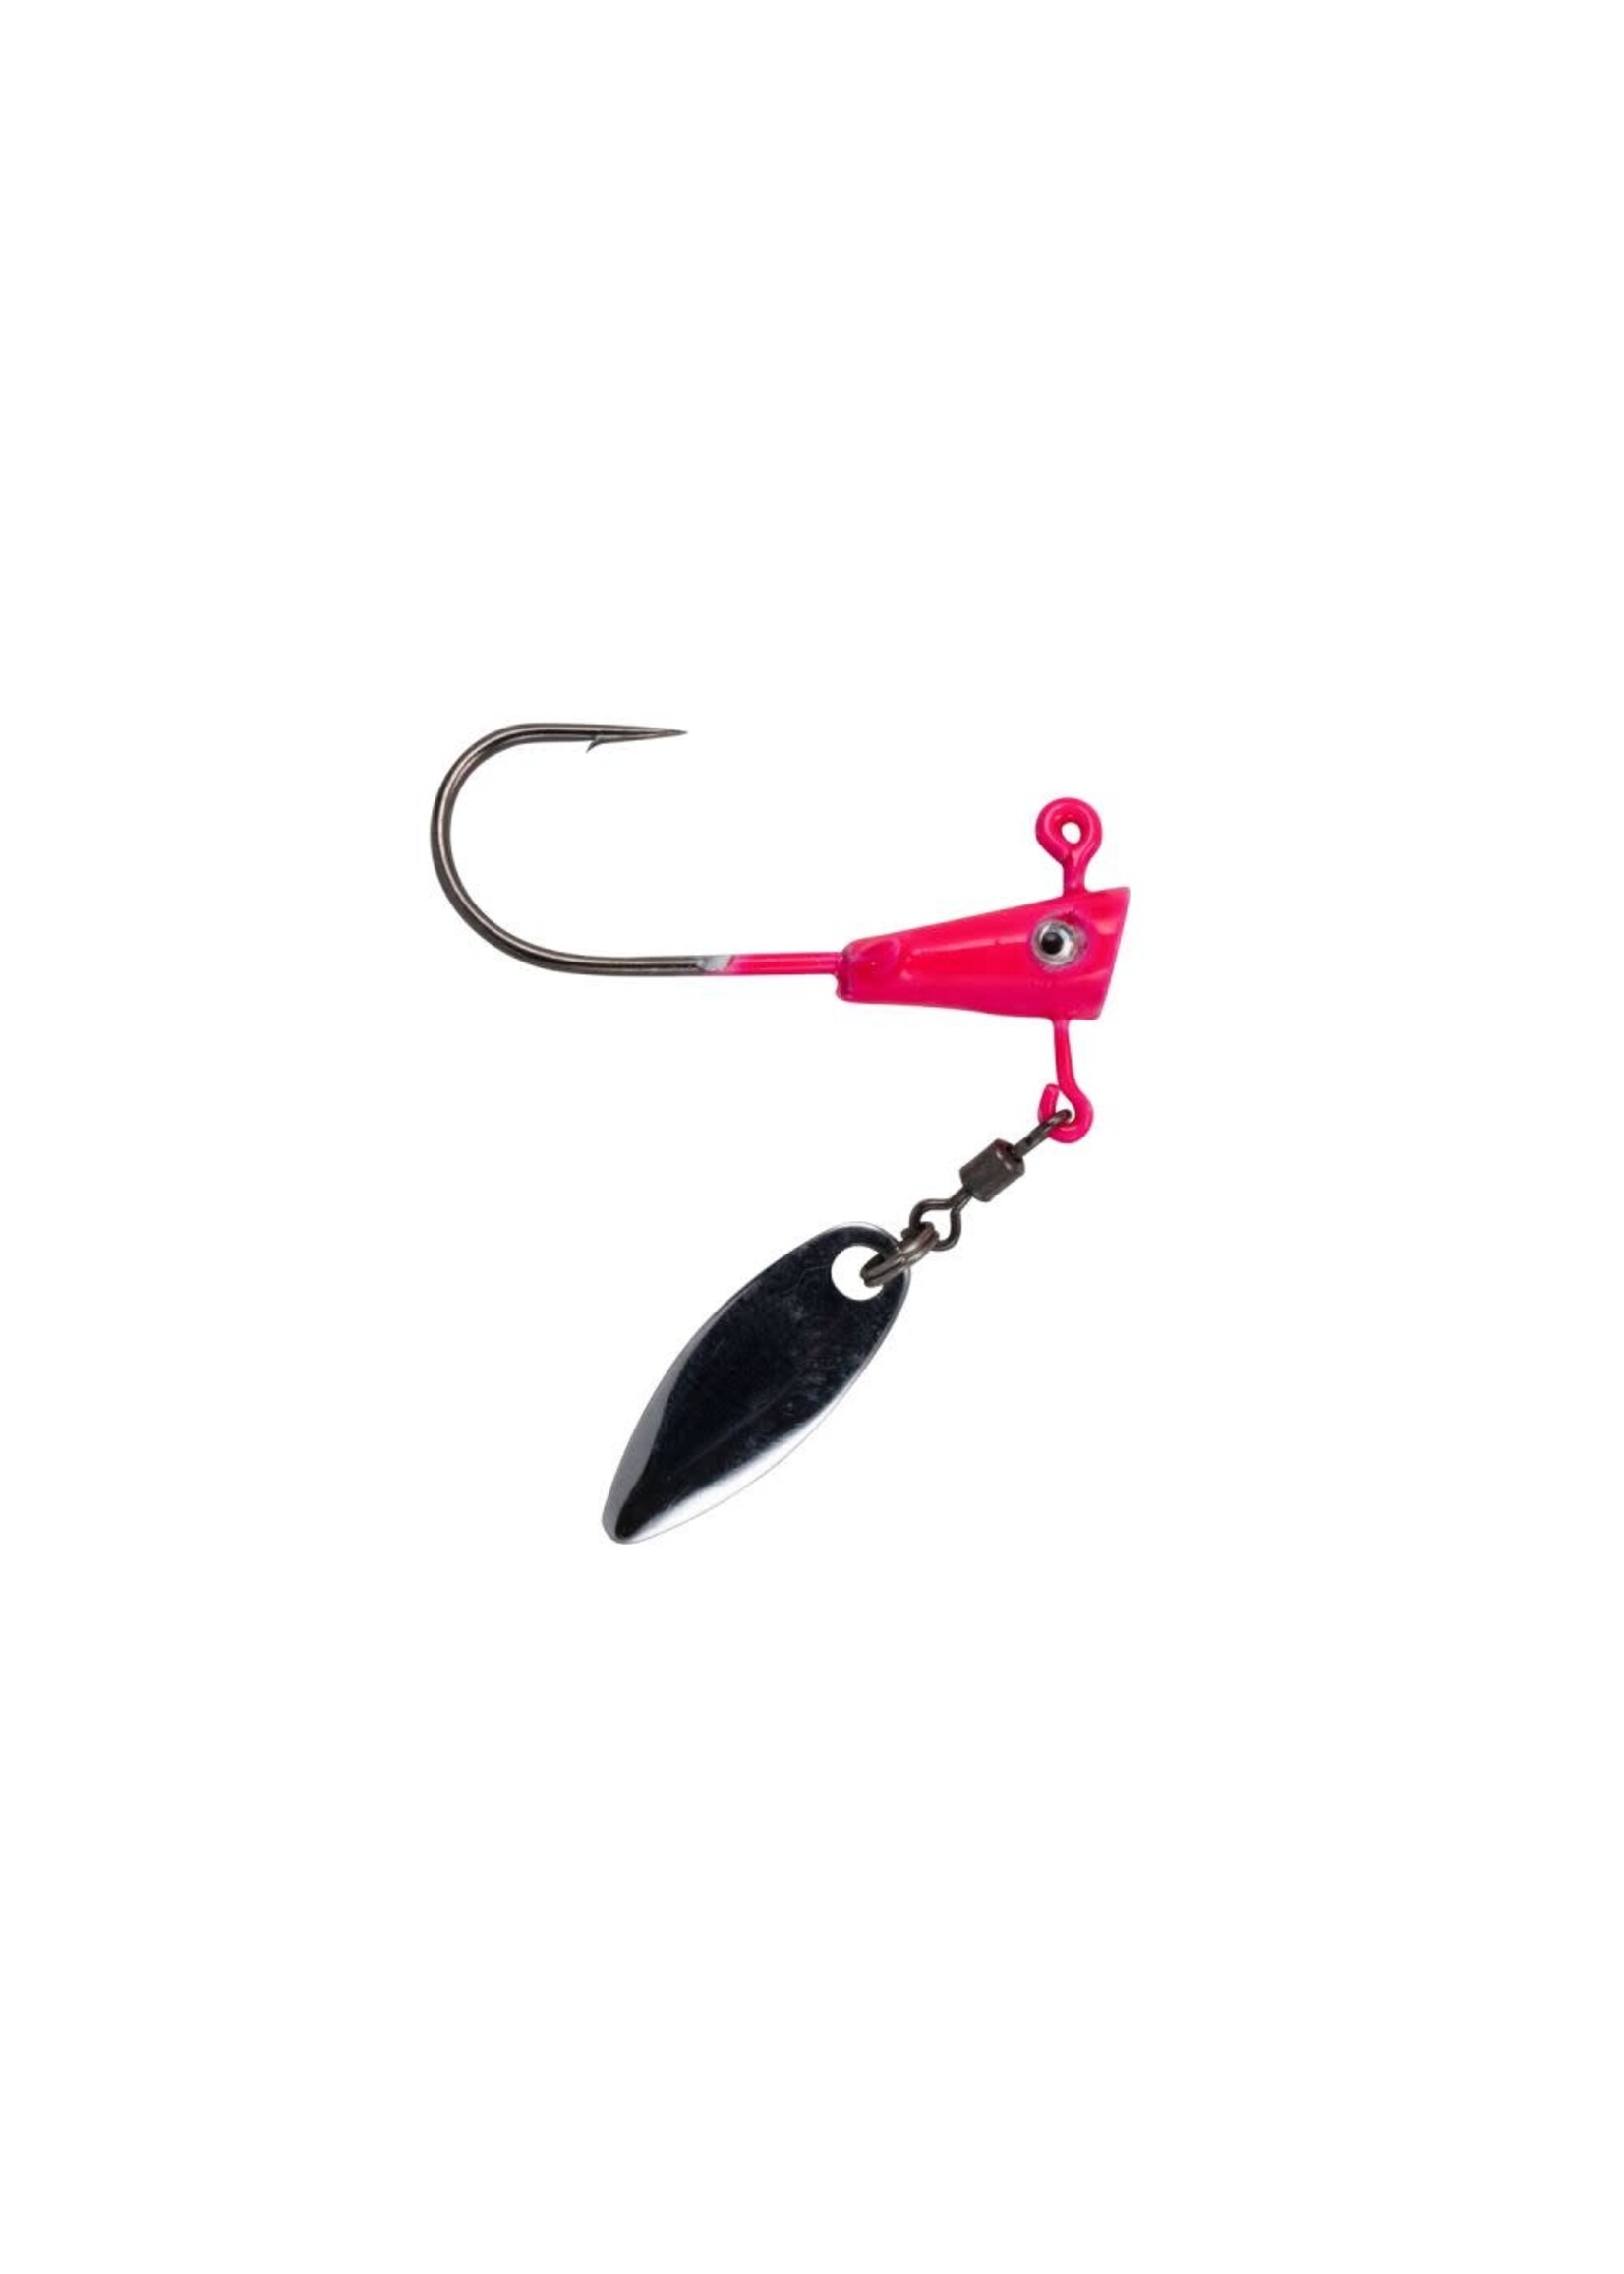 Crappie Magnet Fin Spin Jig Head 3pk